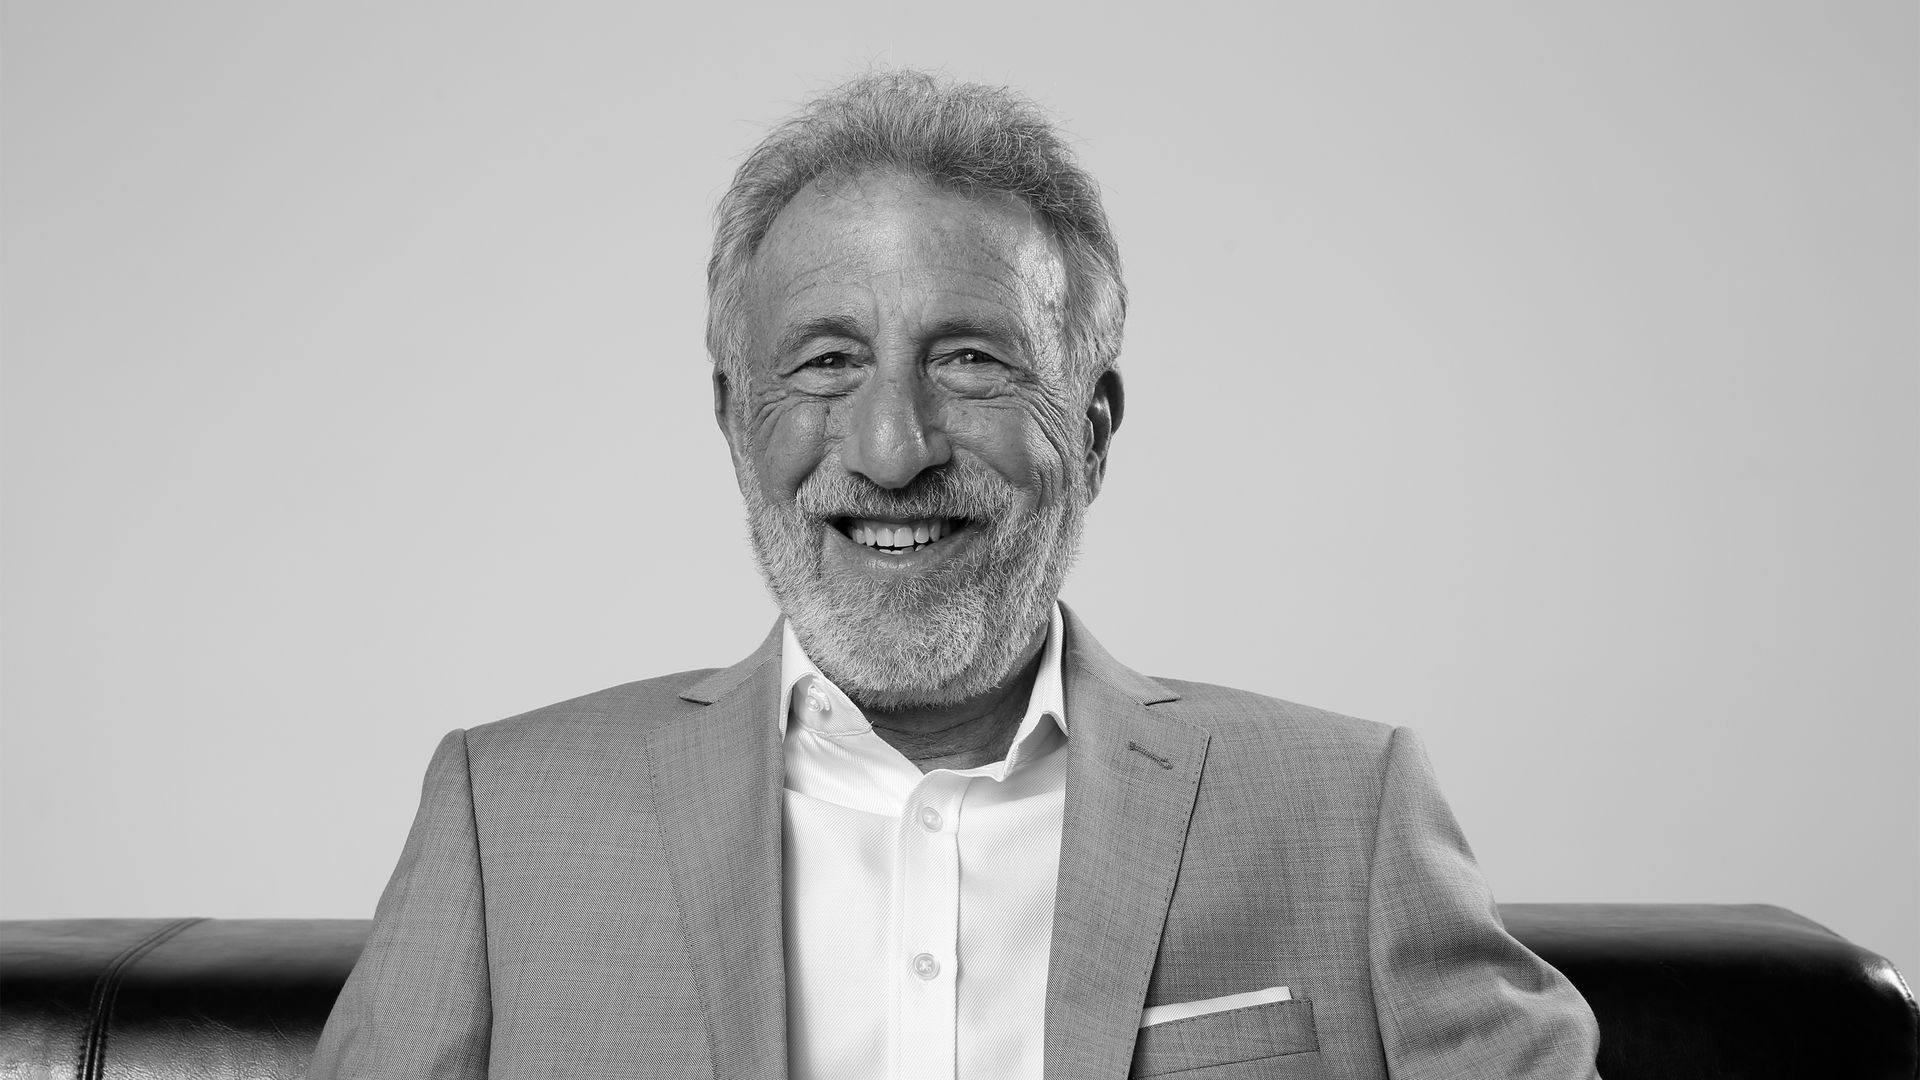 A head shot of Generation Tux founder George Zimmer, in a white button-down shirt and gray suit jacket.